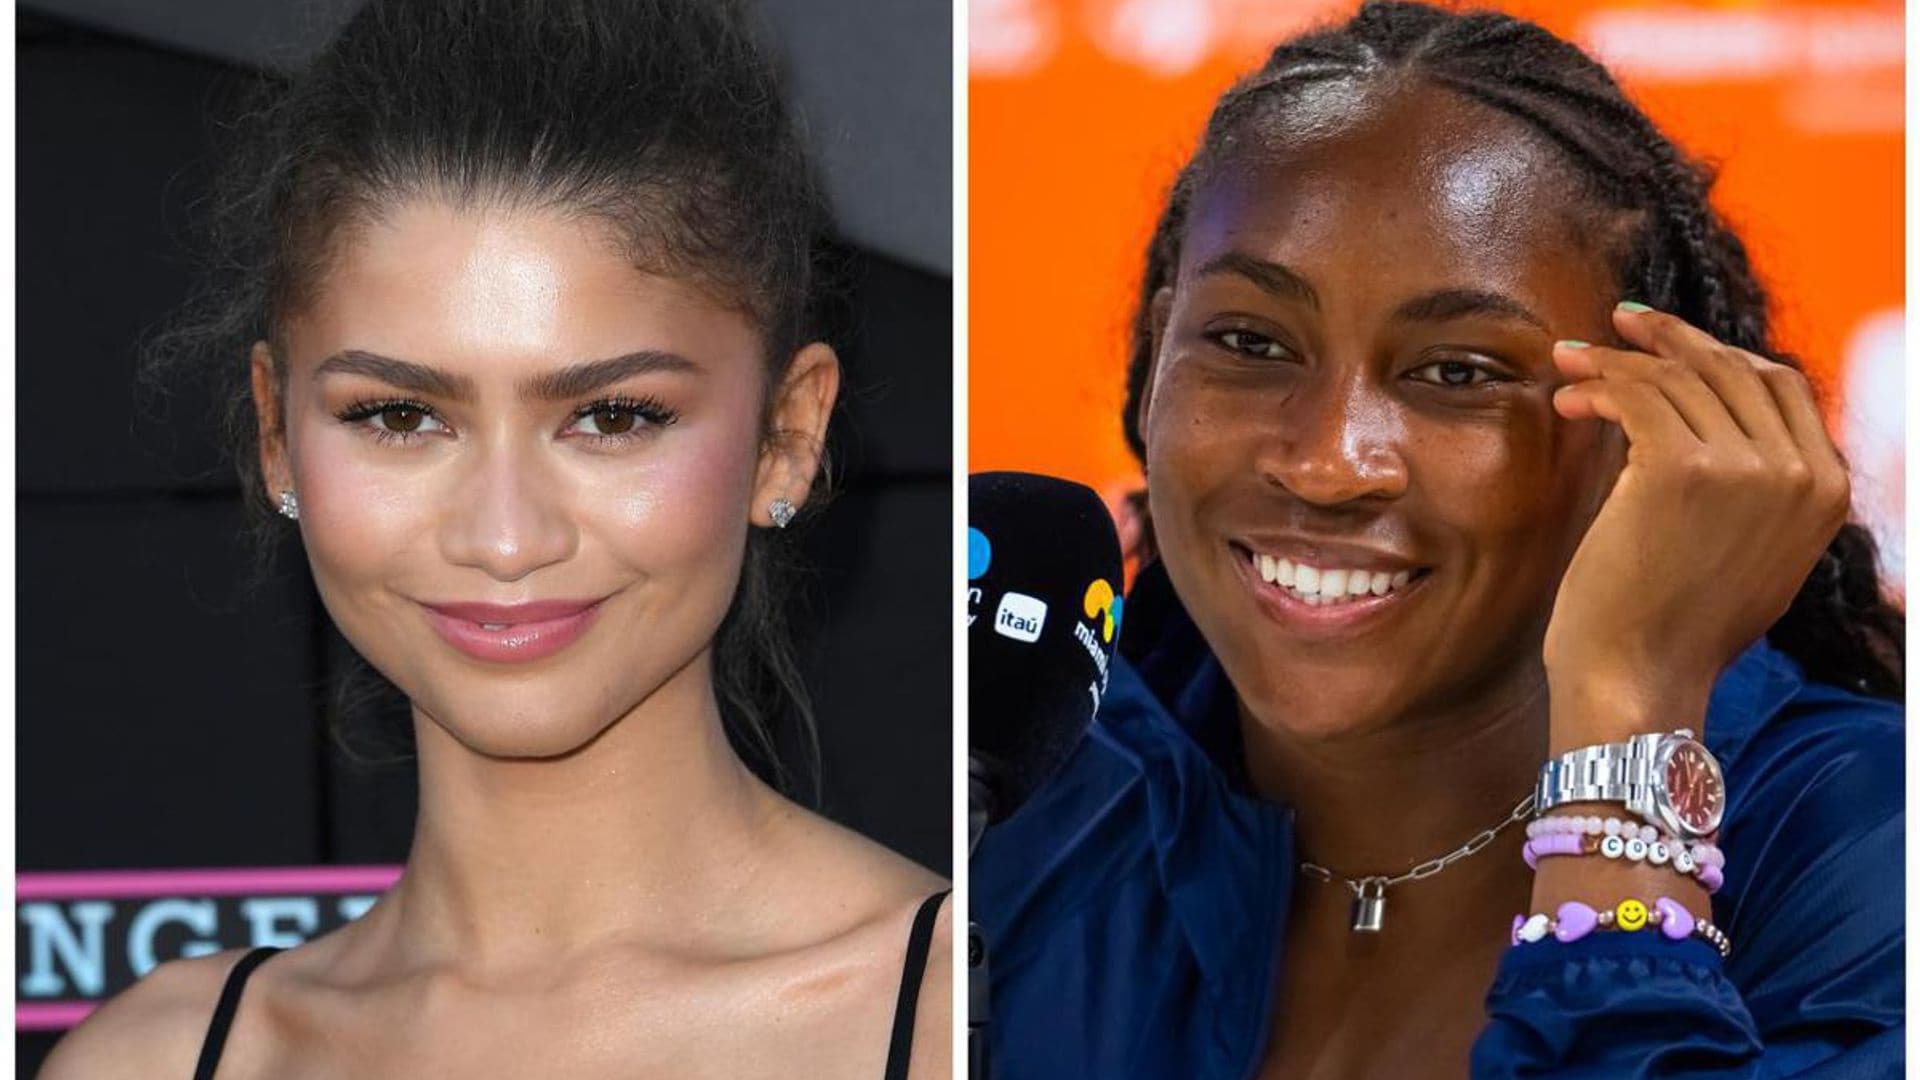 Zendaya and Coco Gauff fangirl over each other online